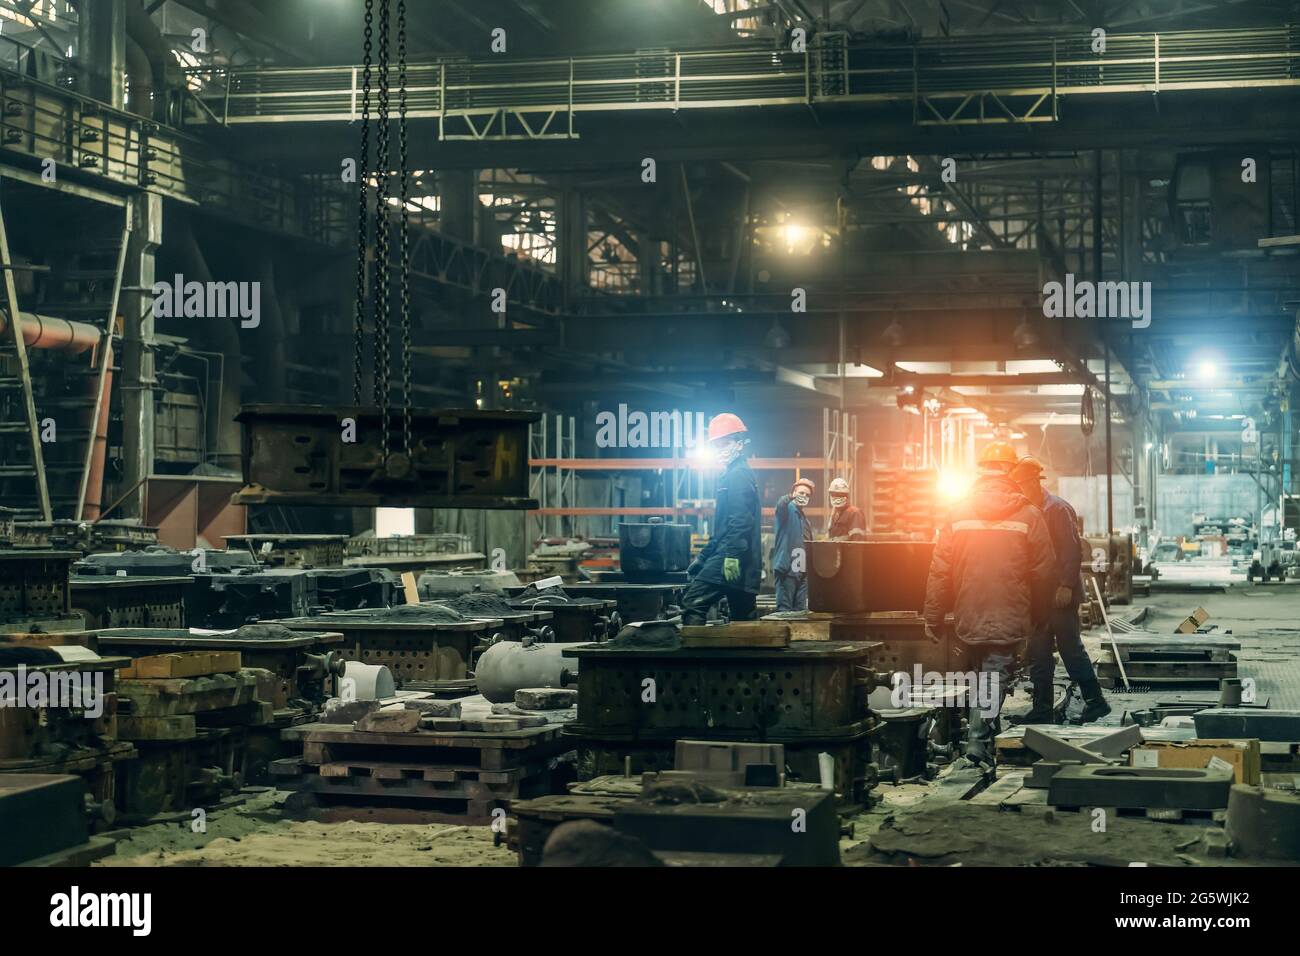 Workers on production line with molds for metal cast in industrial metallurgy workshop. Heavy industry. Stock Photo